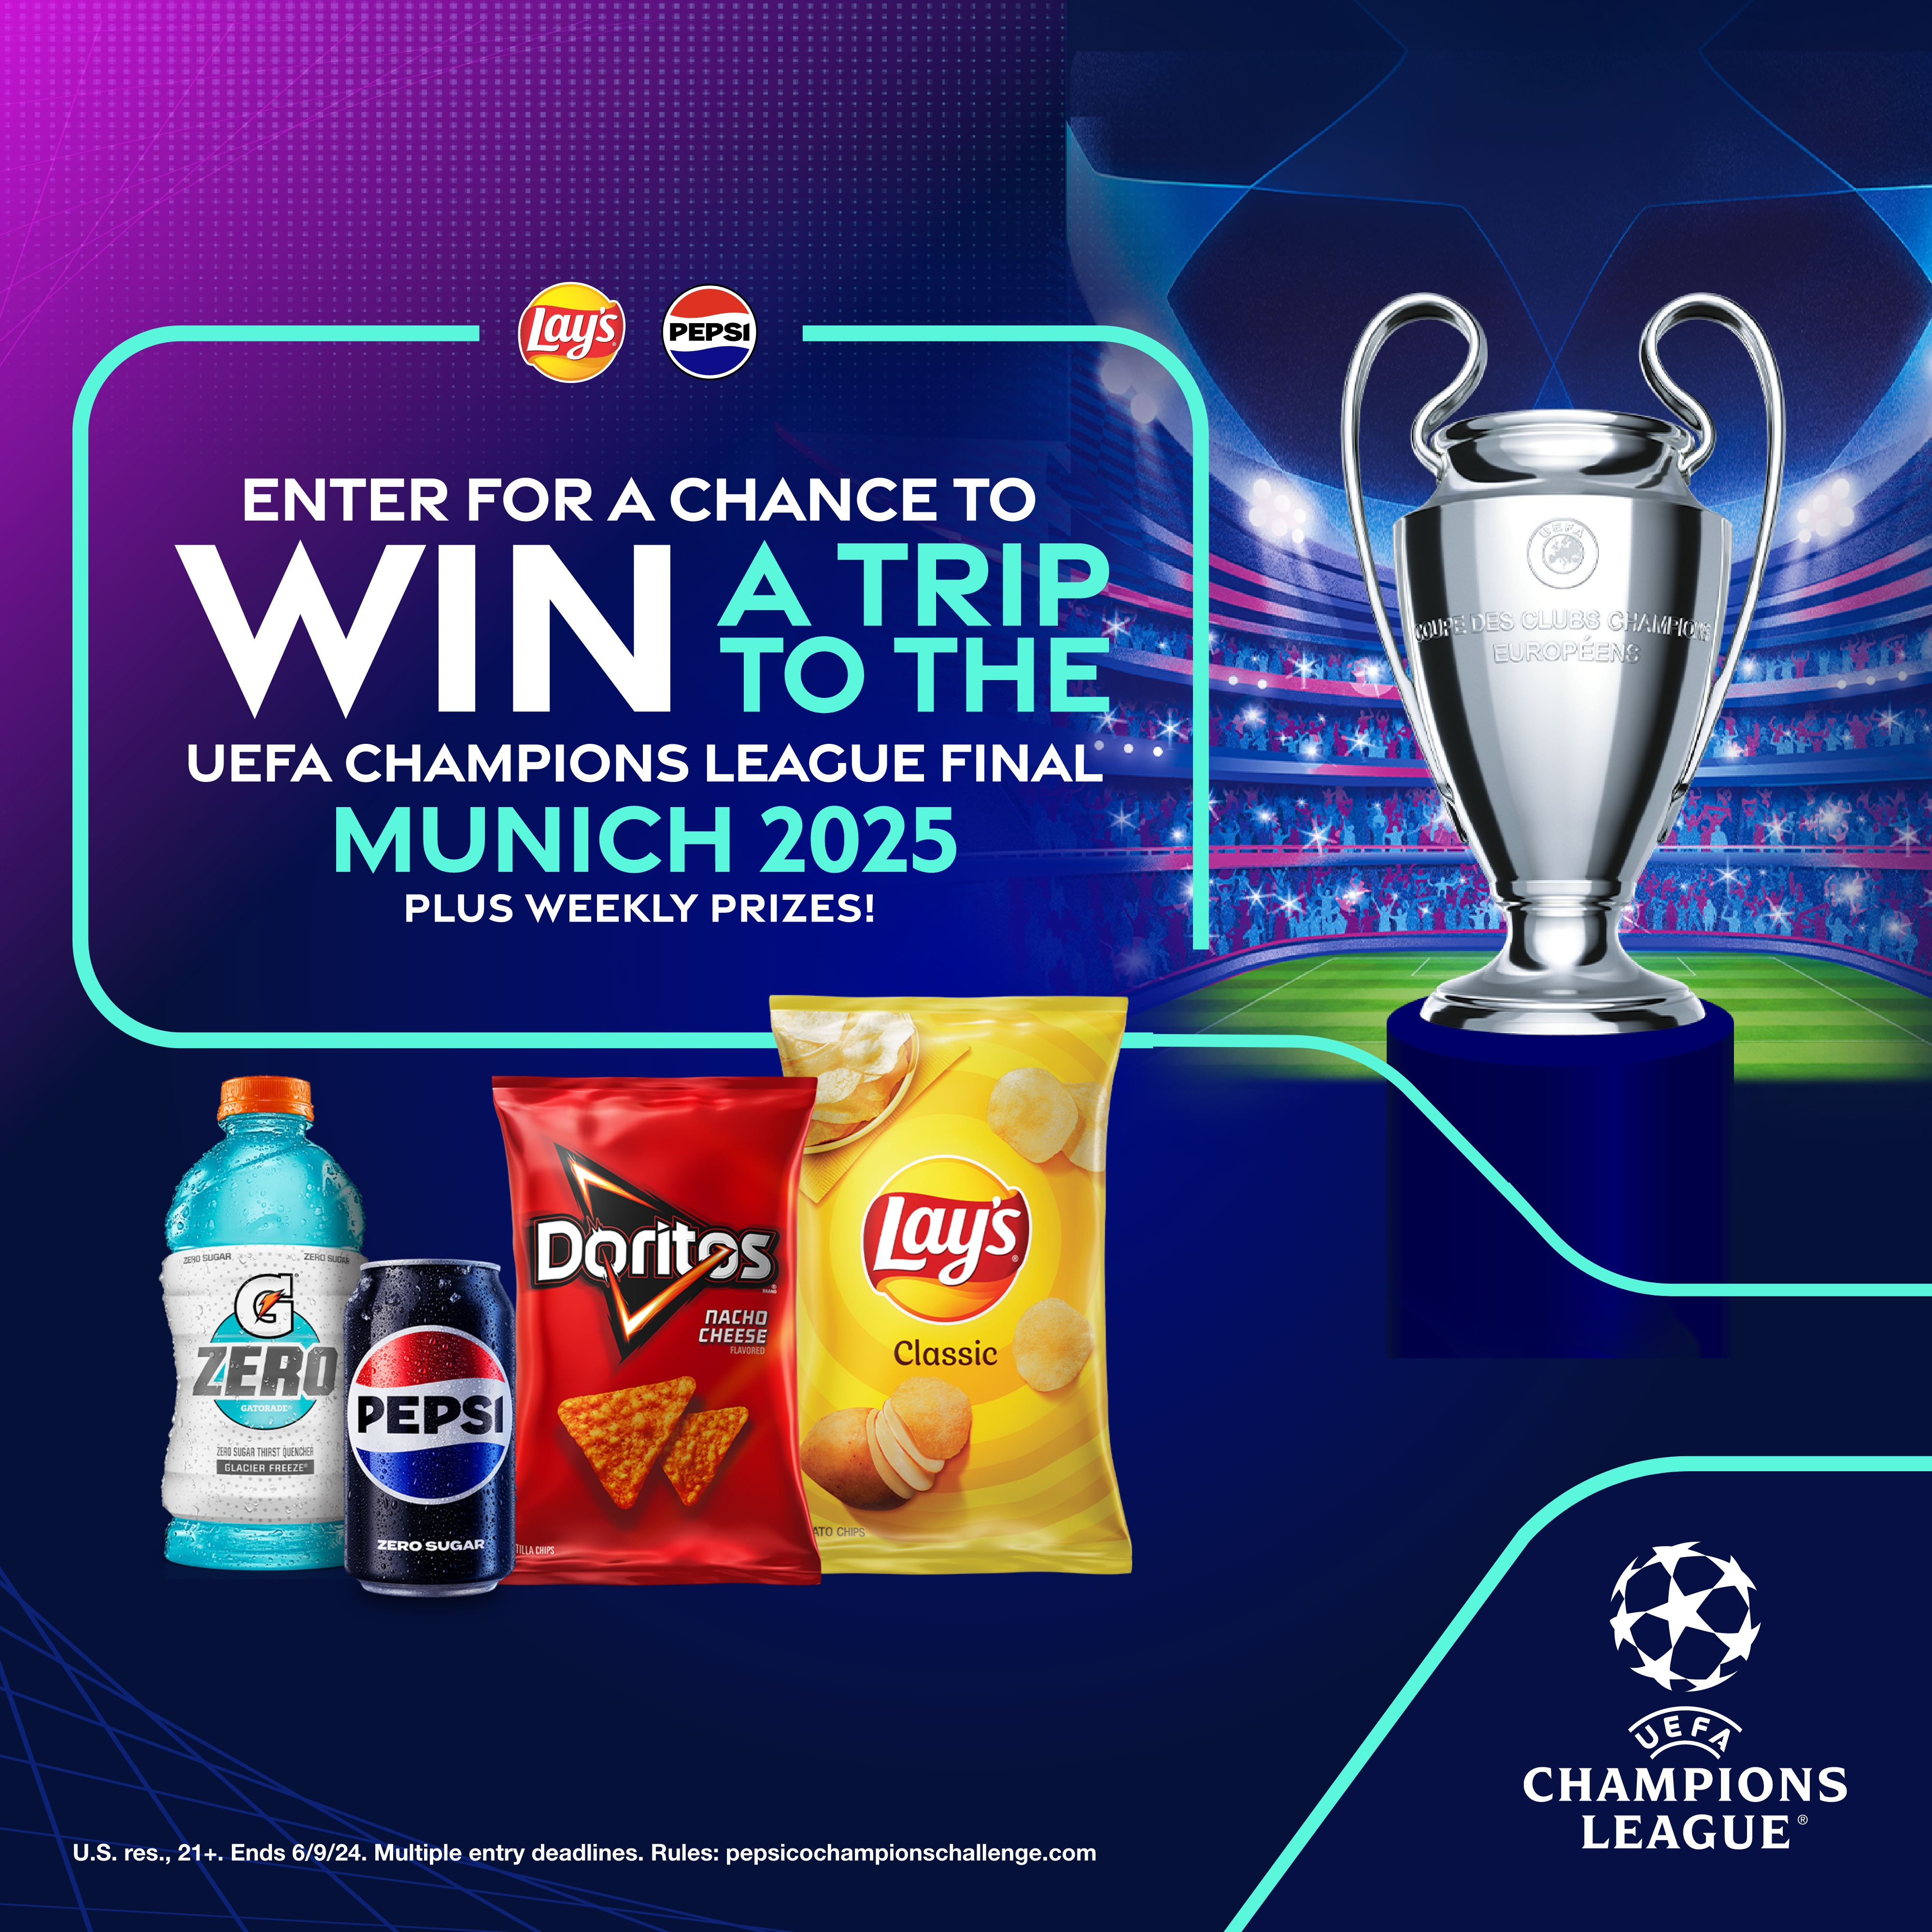 Enter For A Chance To Win A Trip To The UEFA Champions League Final Munich 2025